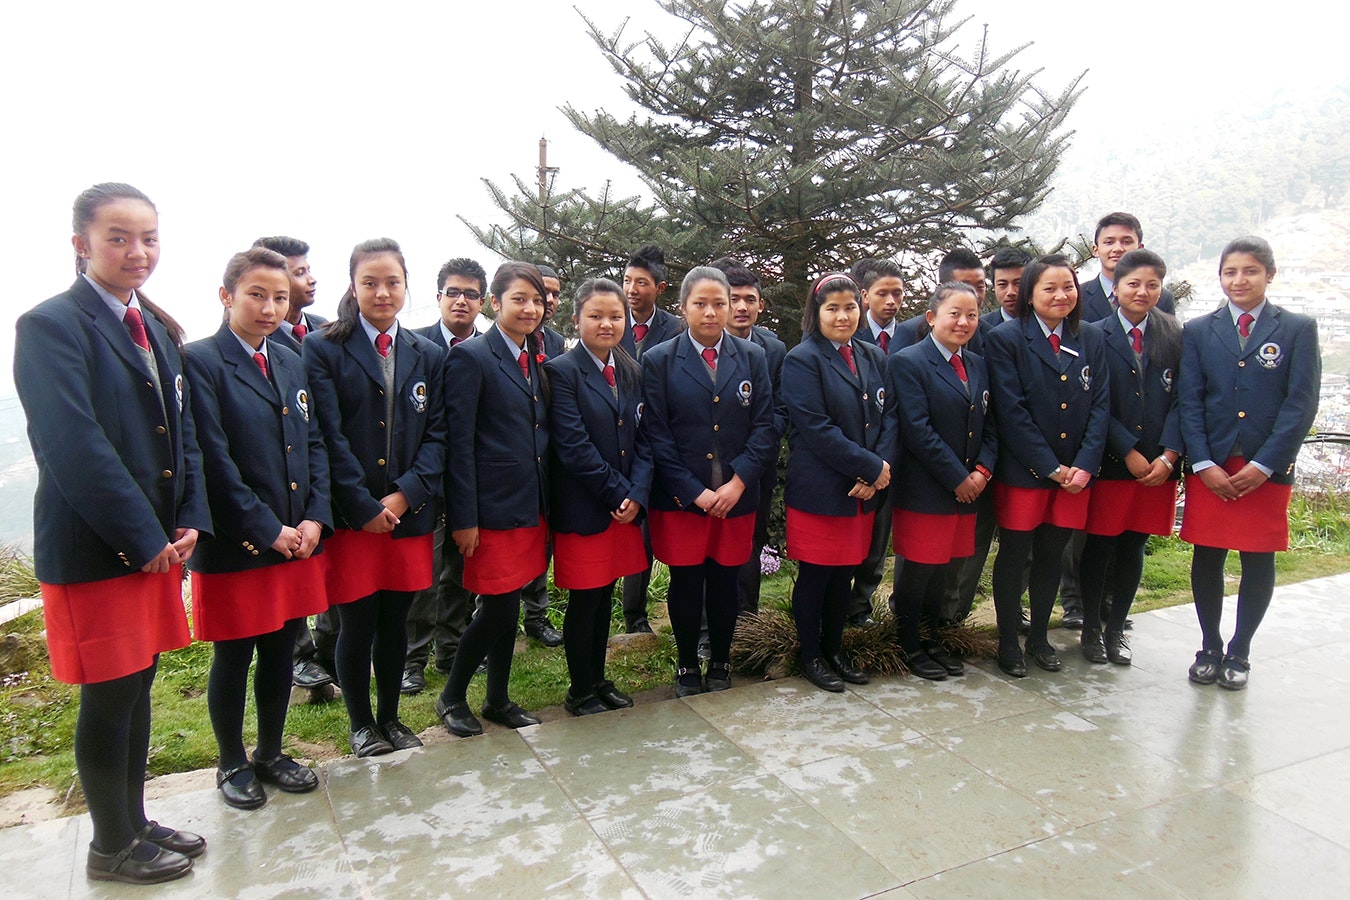 United in Education, United in Nature: Grade 11 students stand proudly in their uniforms, surrounded by the majestic mountains that symbolize their journey of growth and learning at our school.